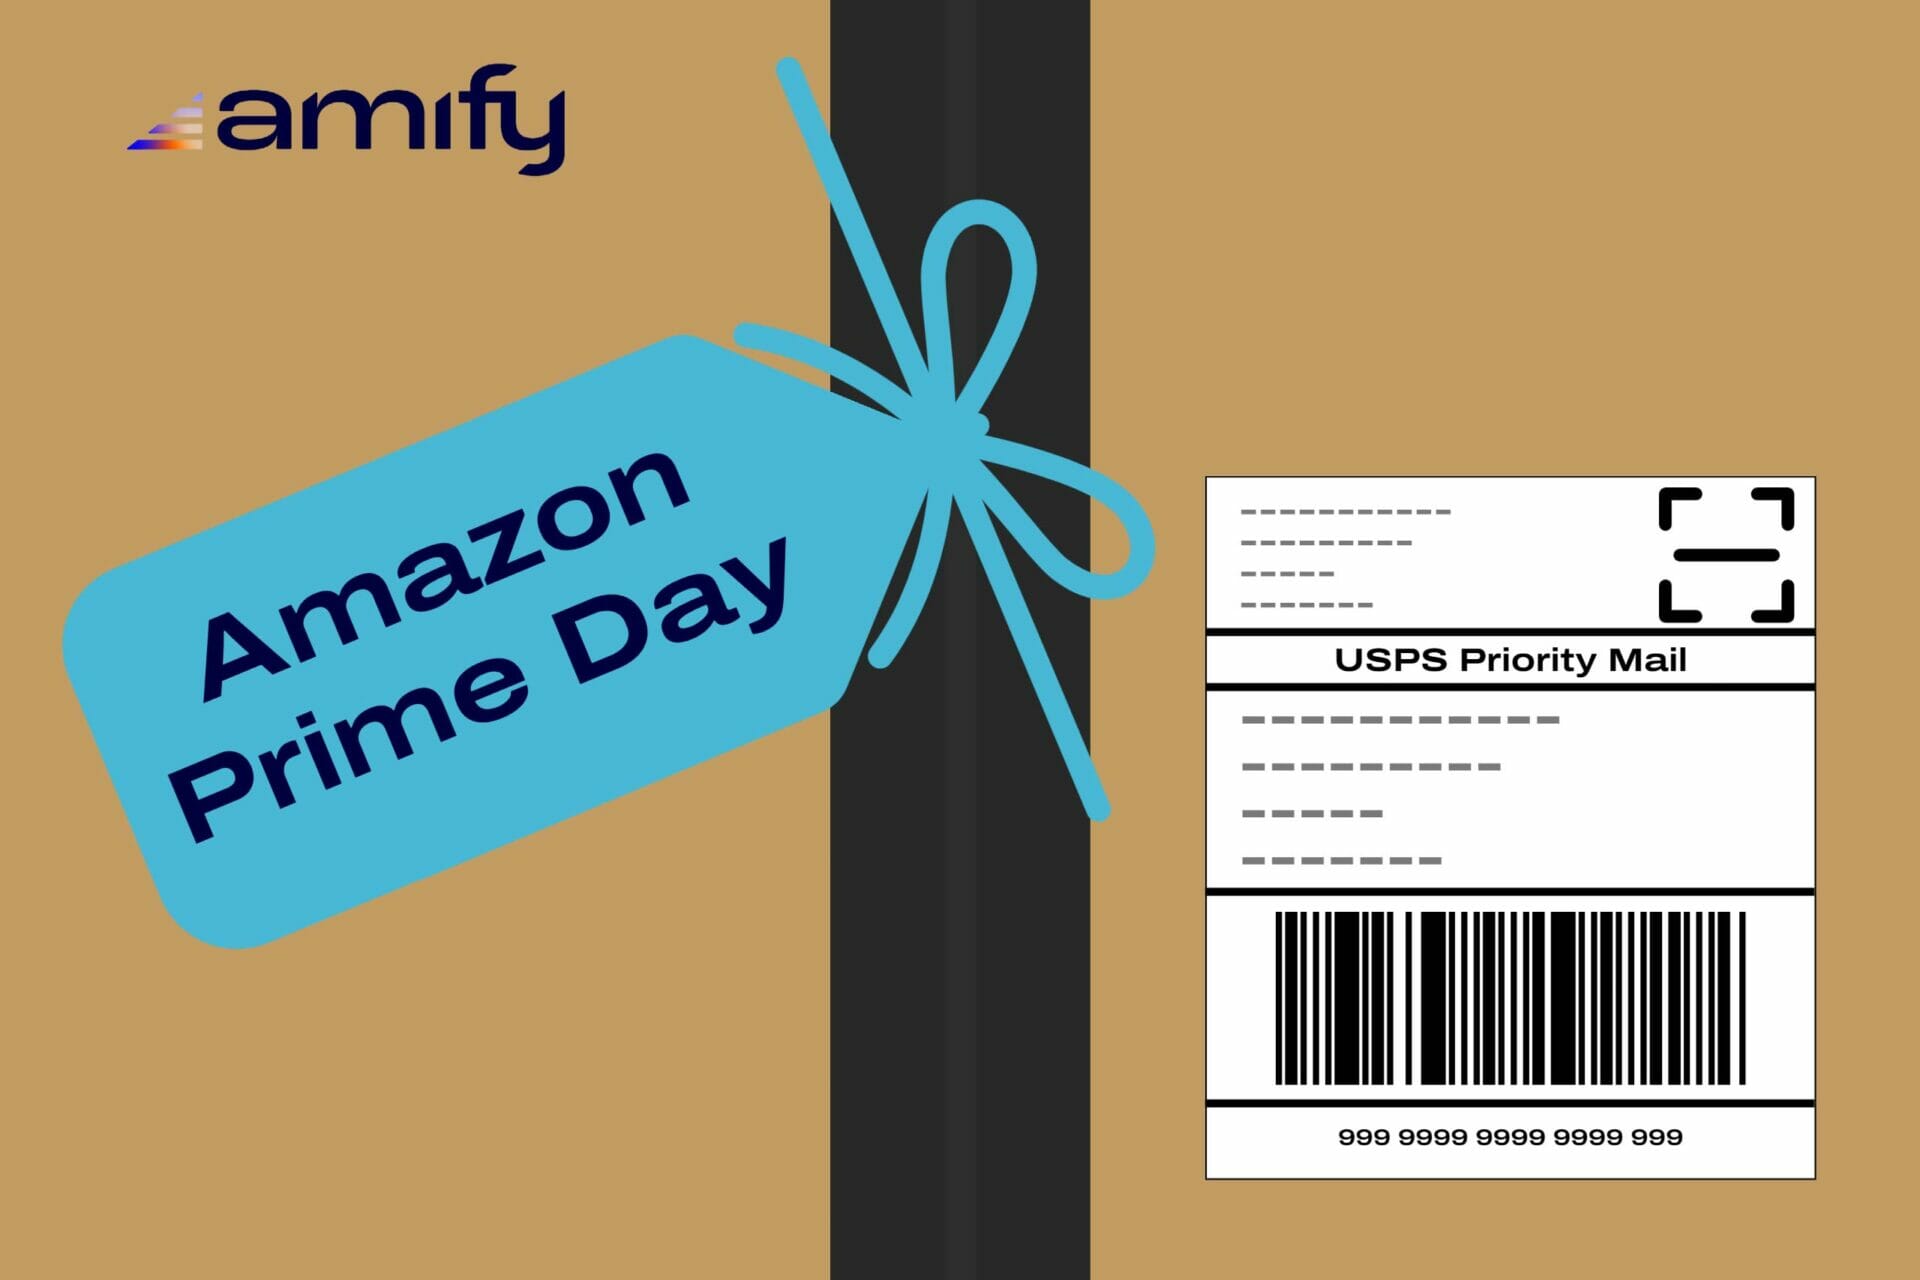 Craft your Prime Day strategy with these keys to maximizing one of the biggest e-commerce events of the year.